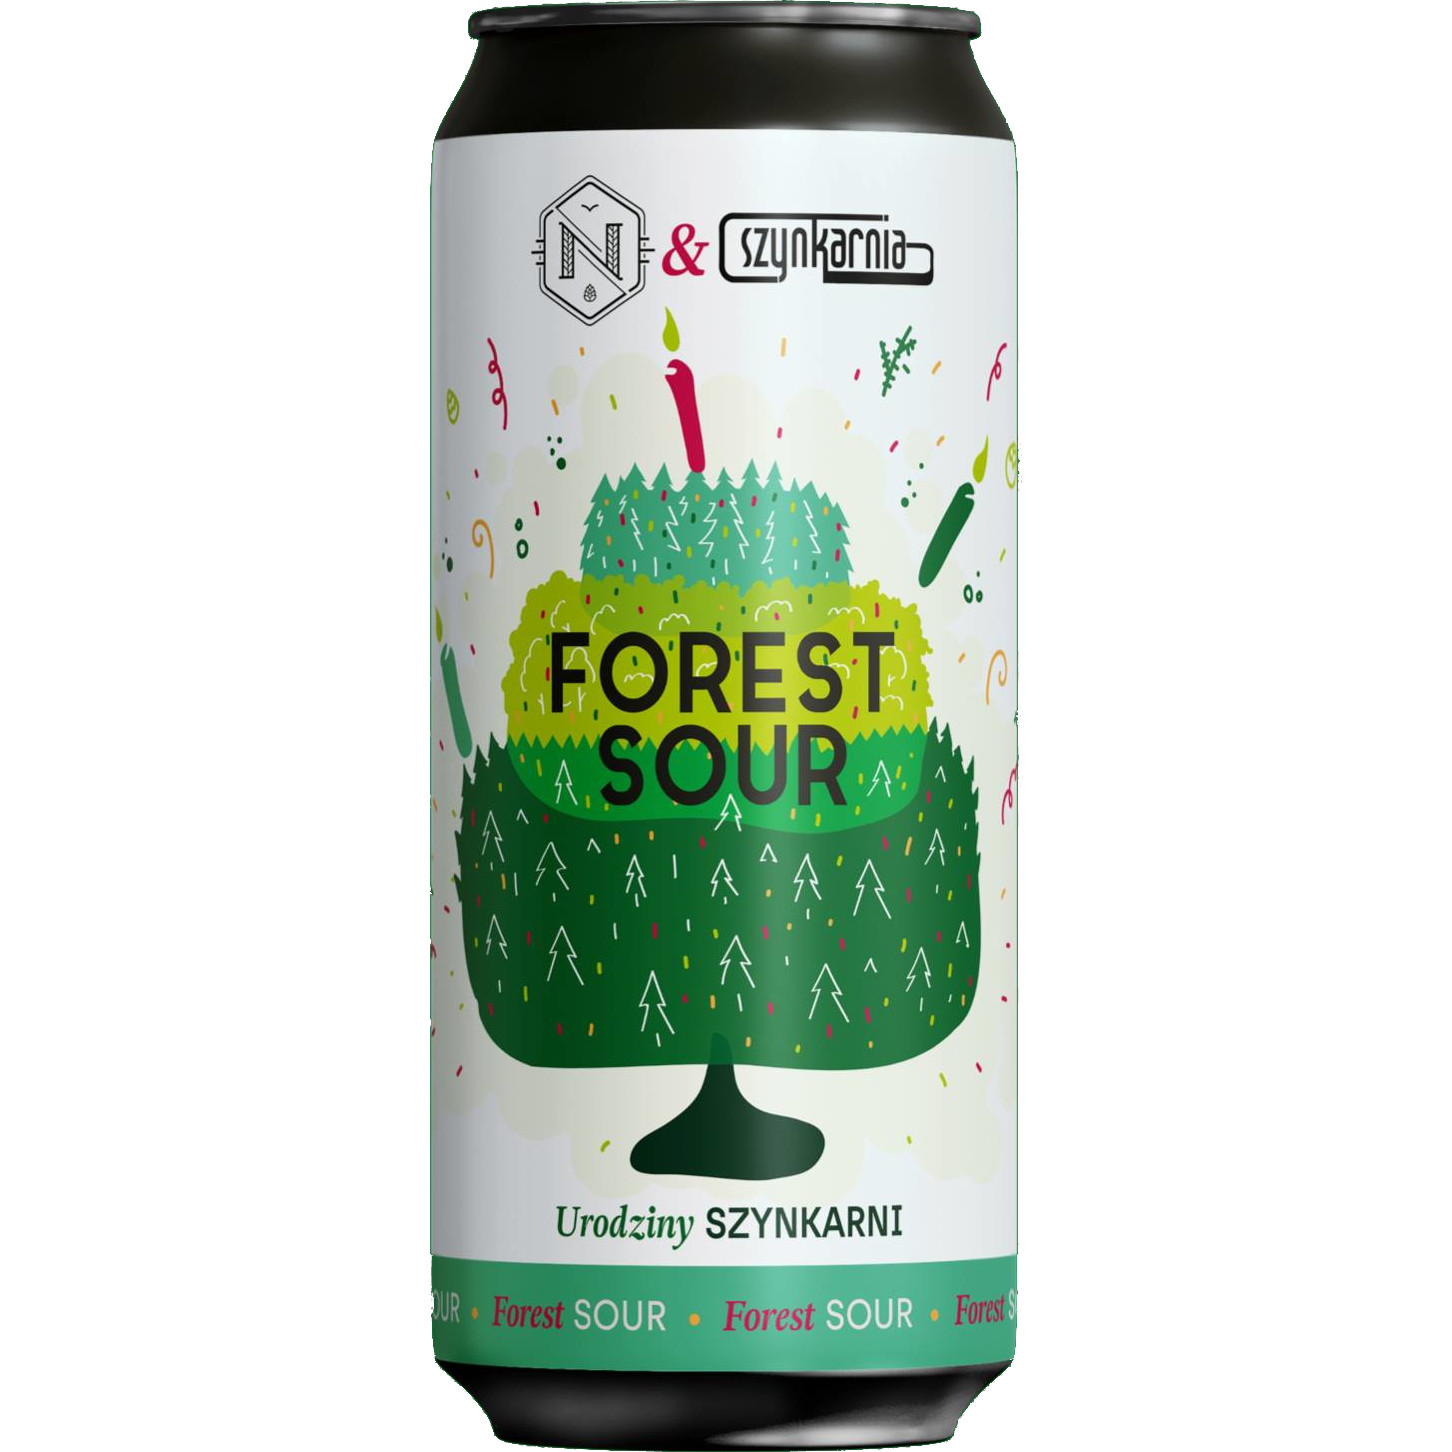 Nepomucen / Szynkarnia FOREST SOUR – FOREST SOUR ALE